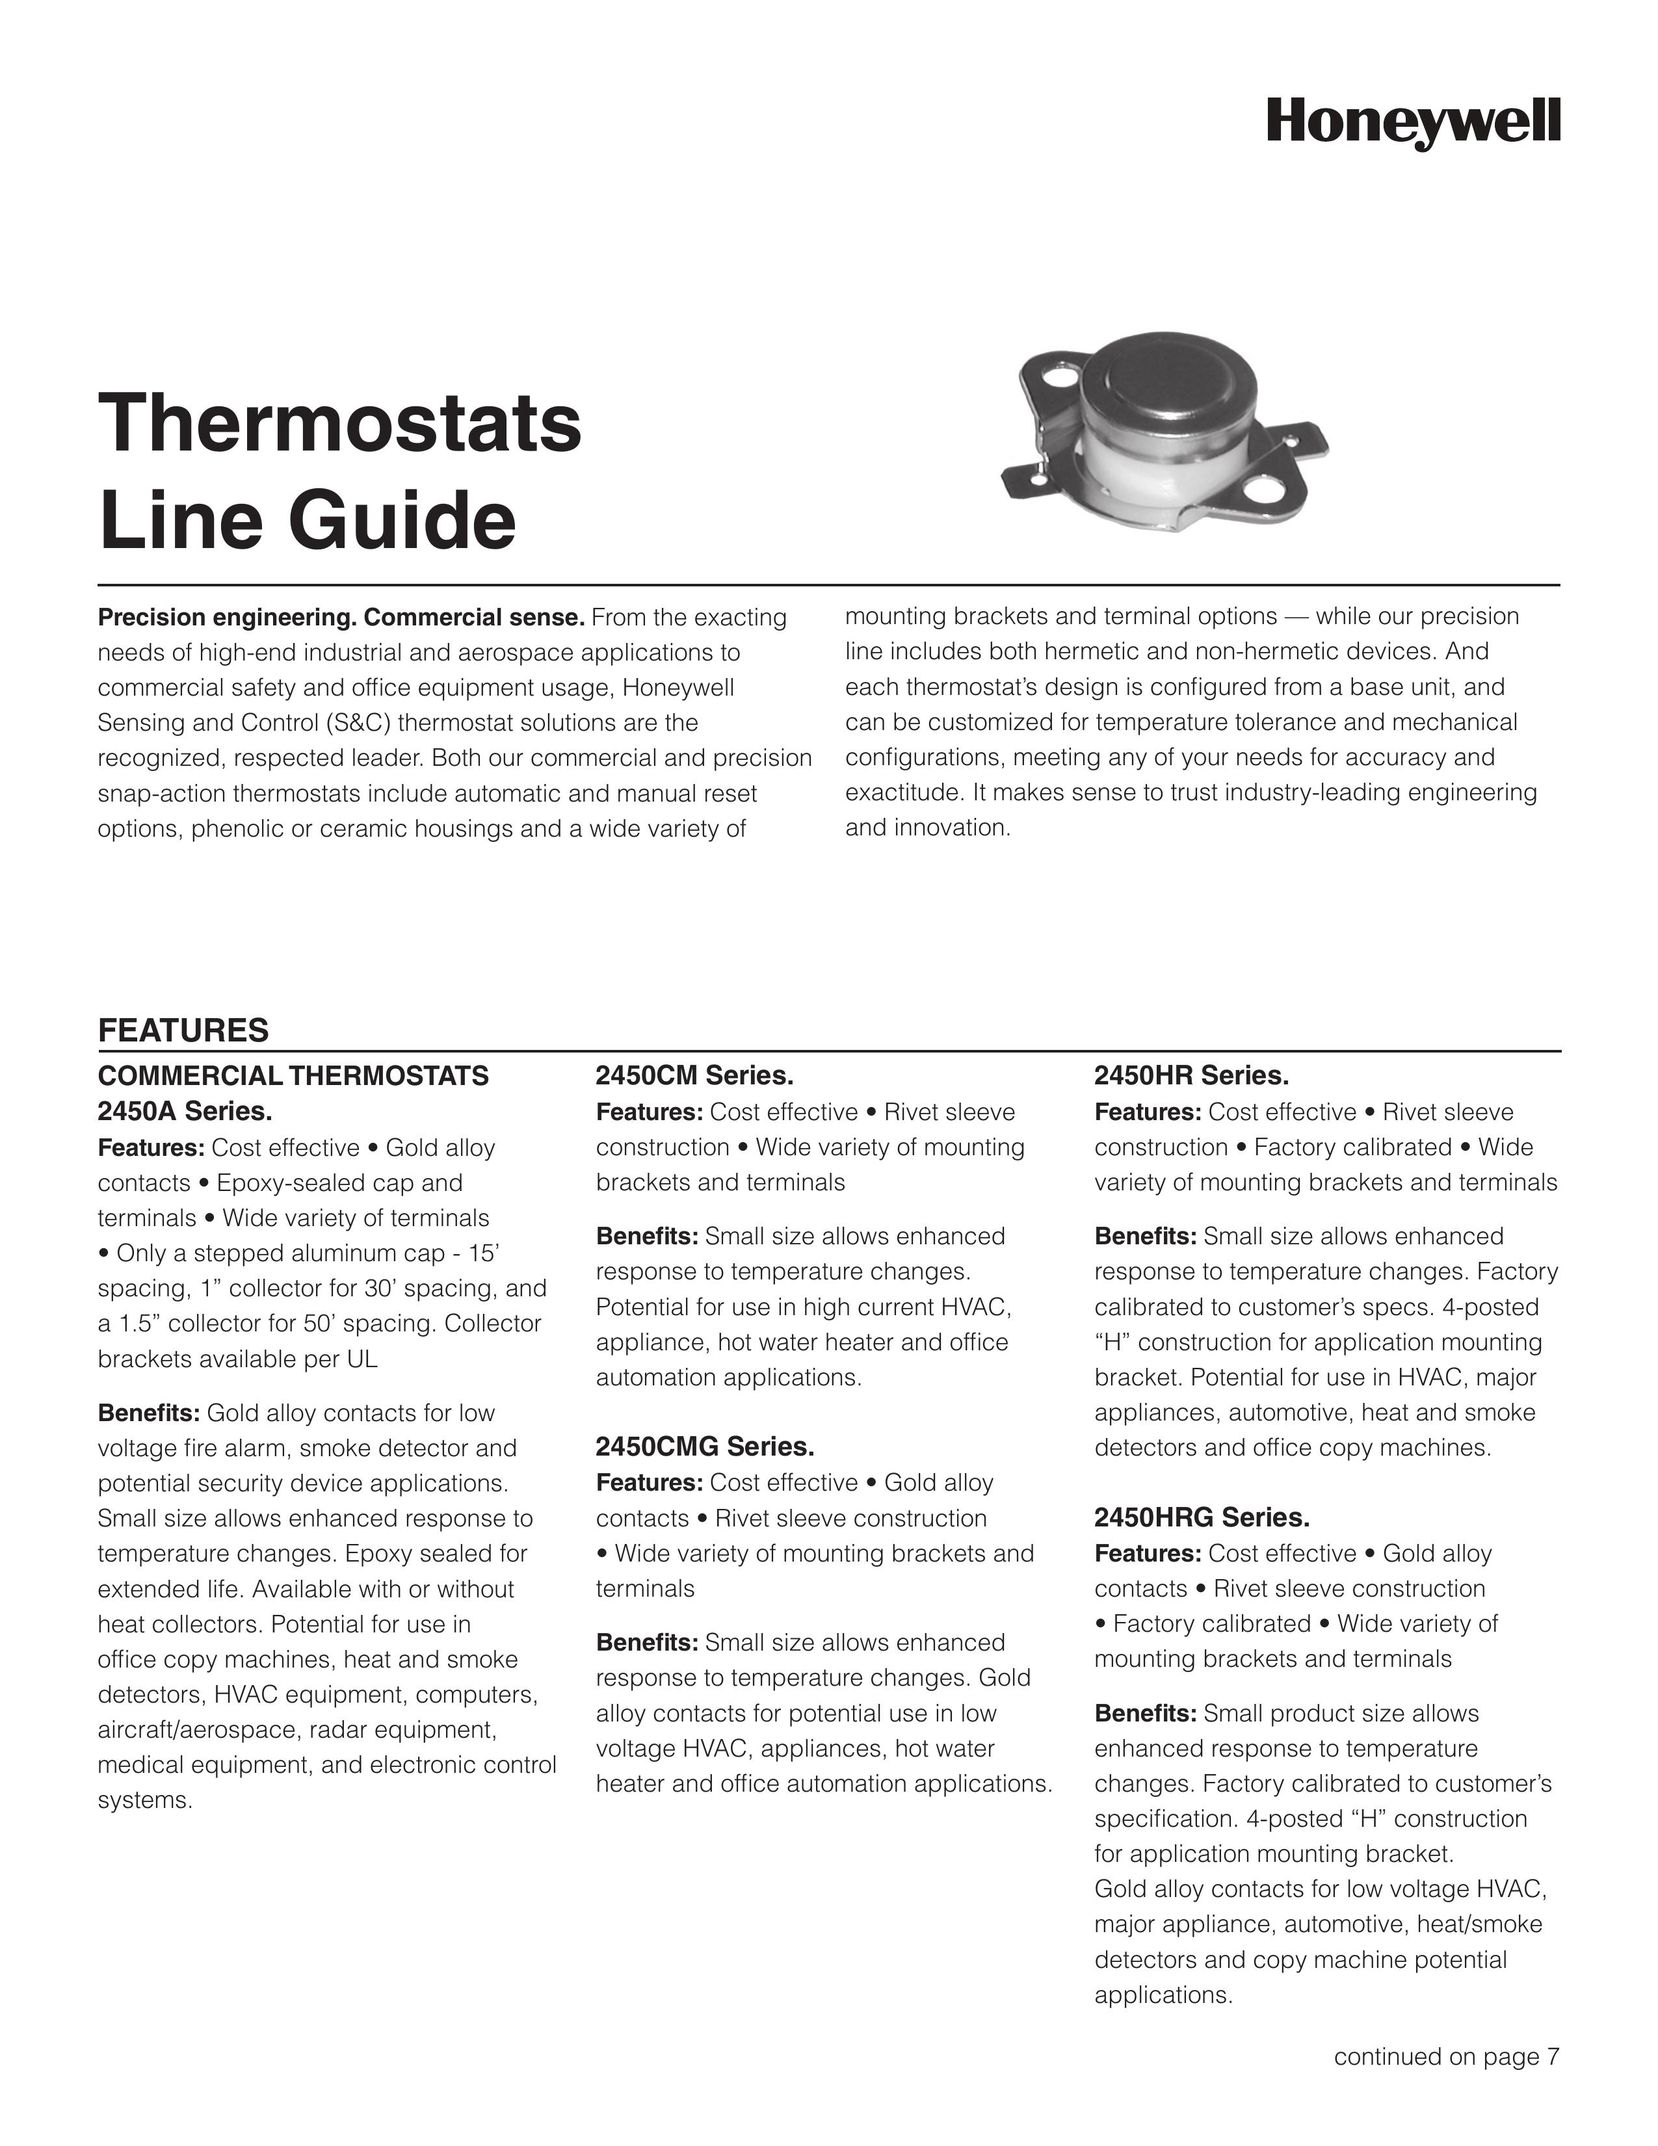 Honeywell 2450A Thermostat User Manual